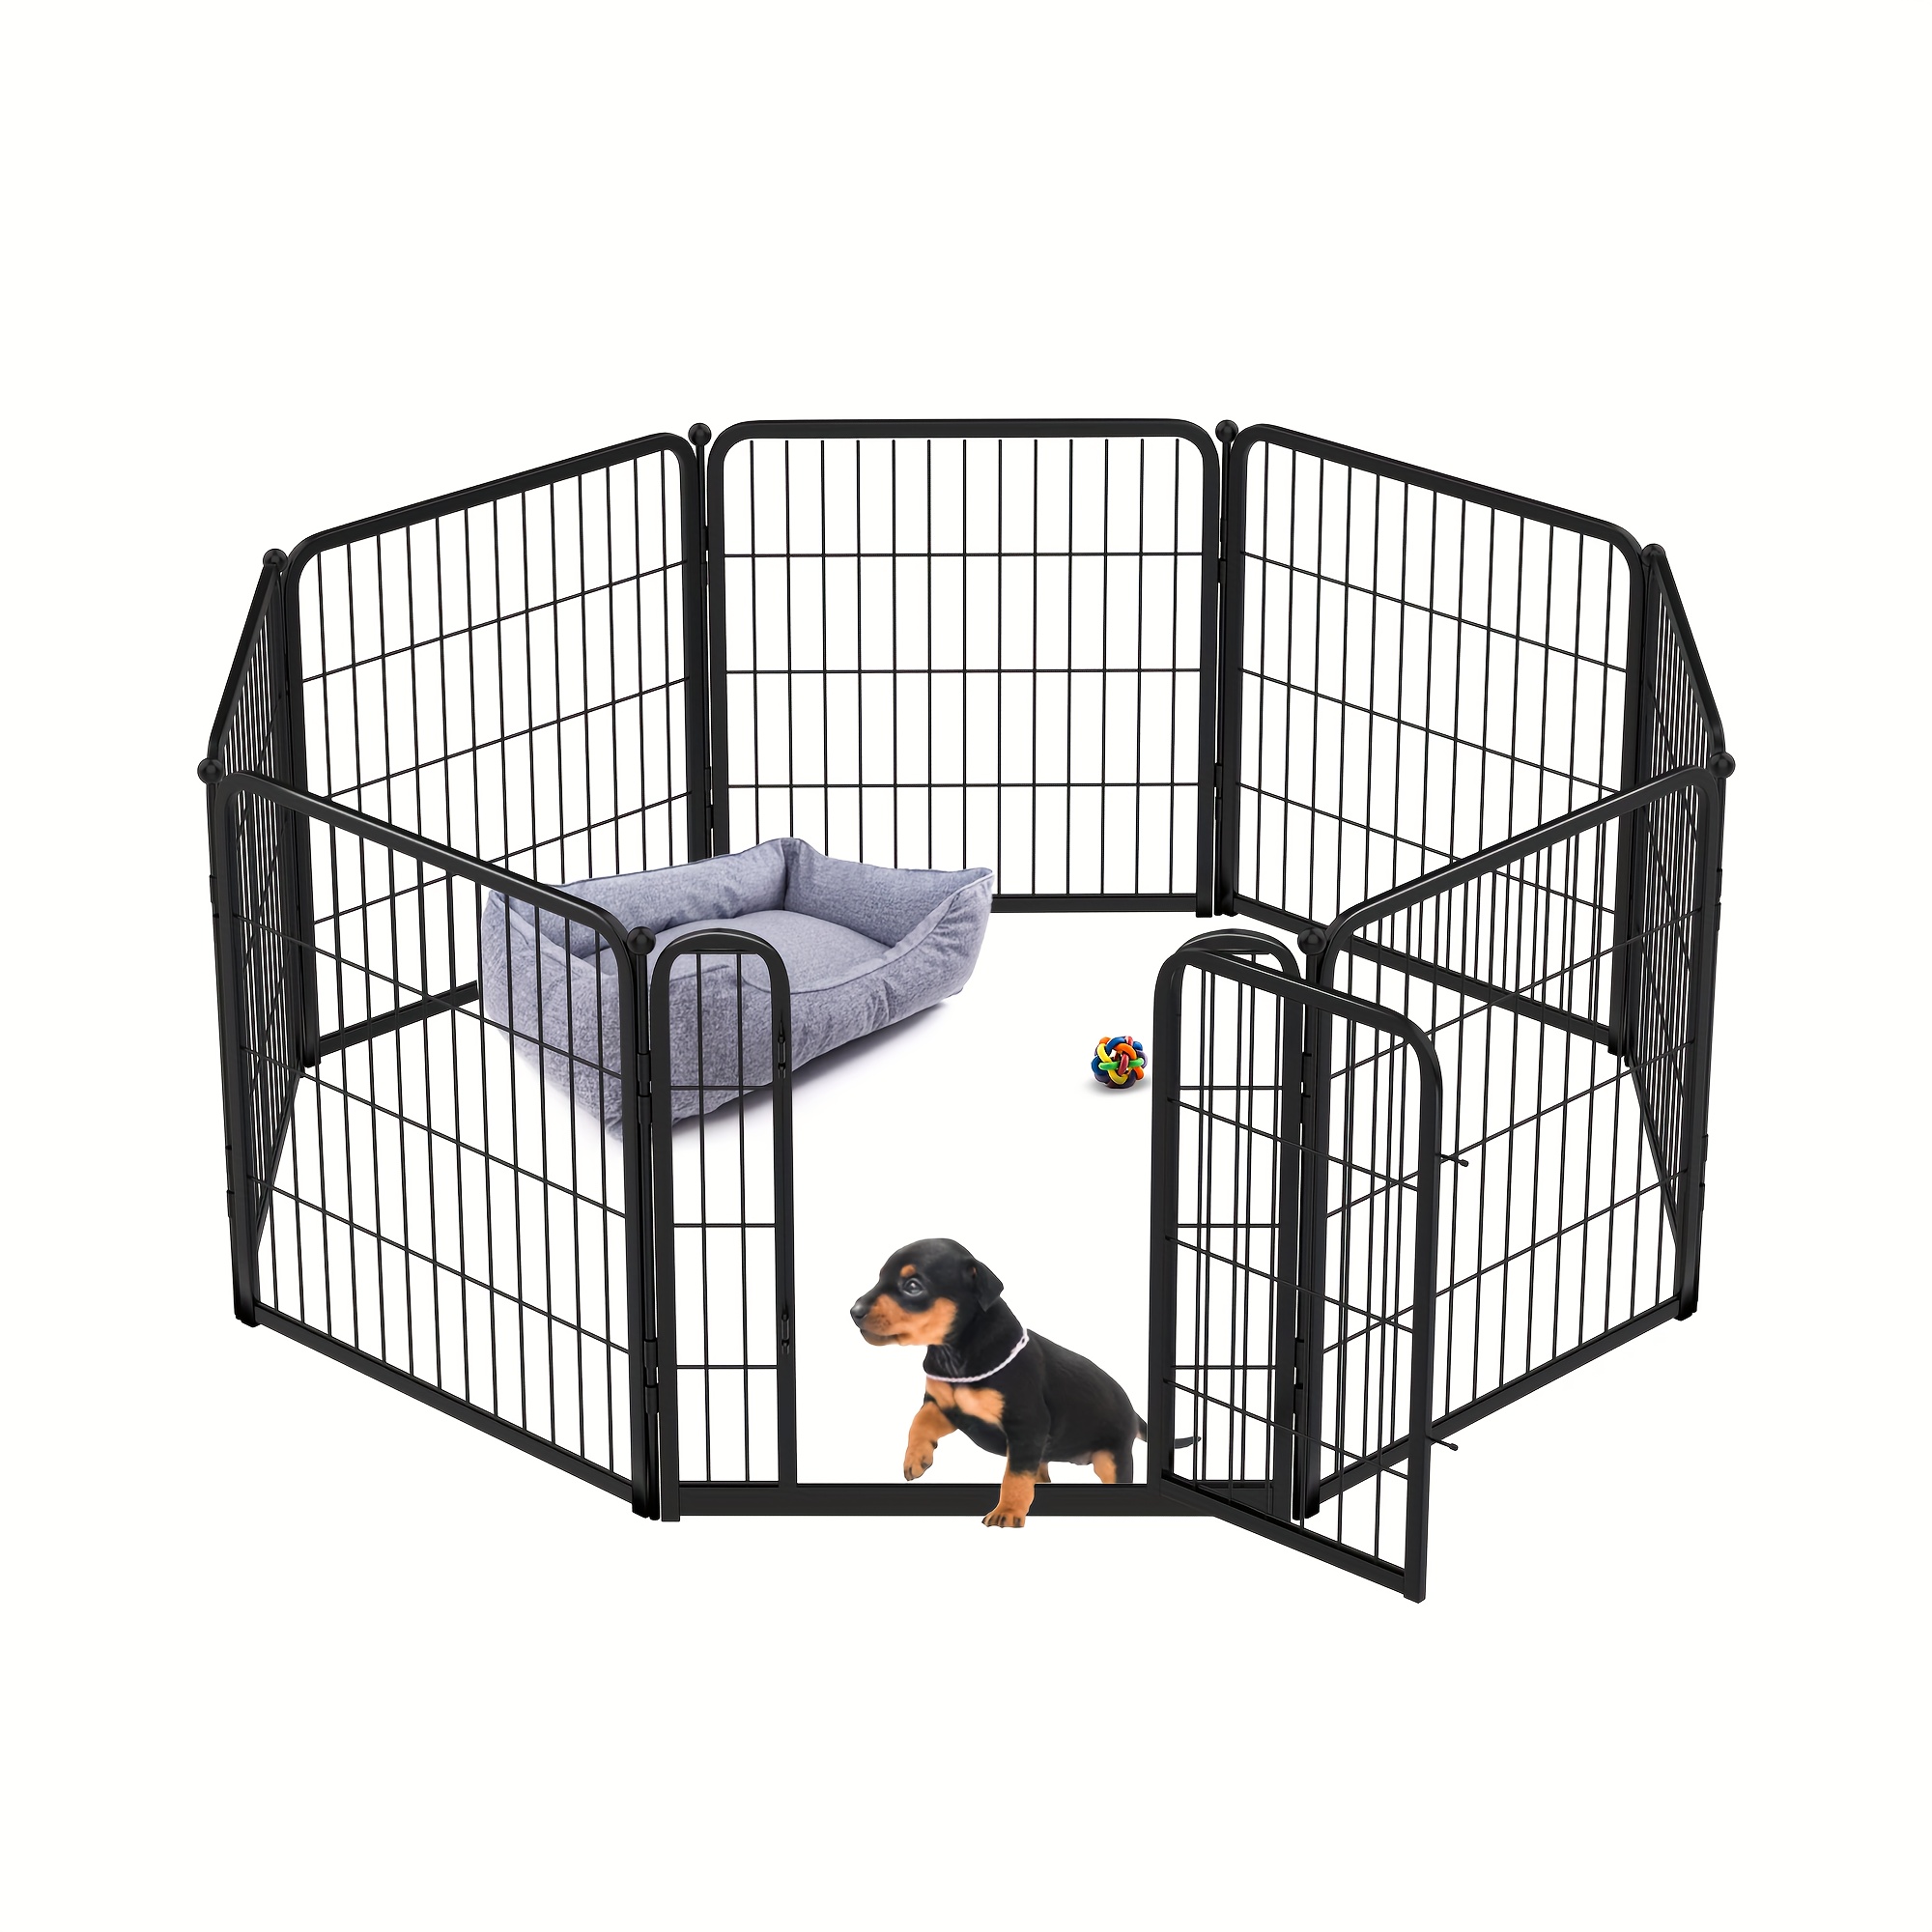 

Fxw 24-inch High Black Metal Pet Playpen, Indoor Safety Fence For Puppies/small Dogs, Patented Design, Durable Metal Construction